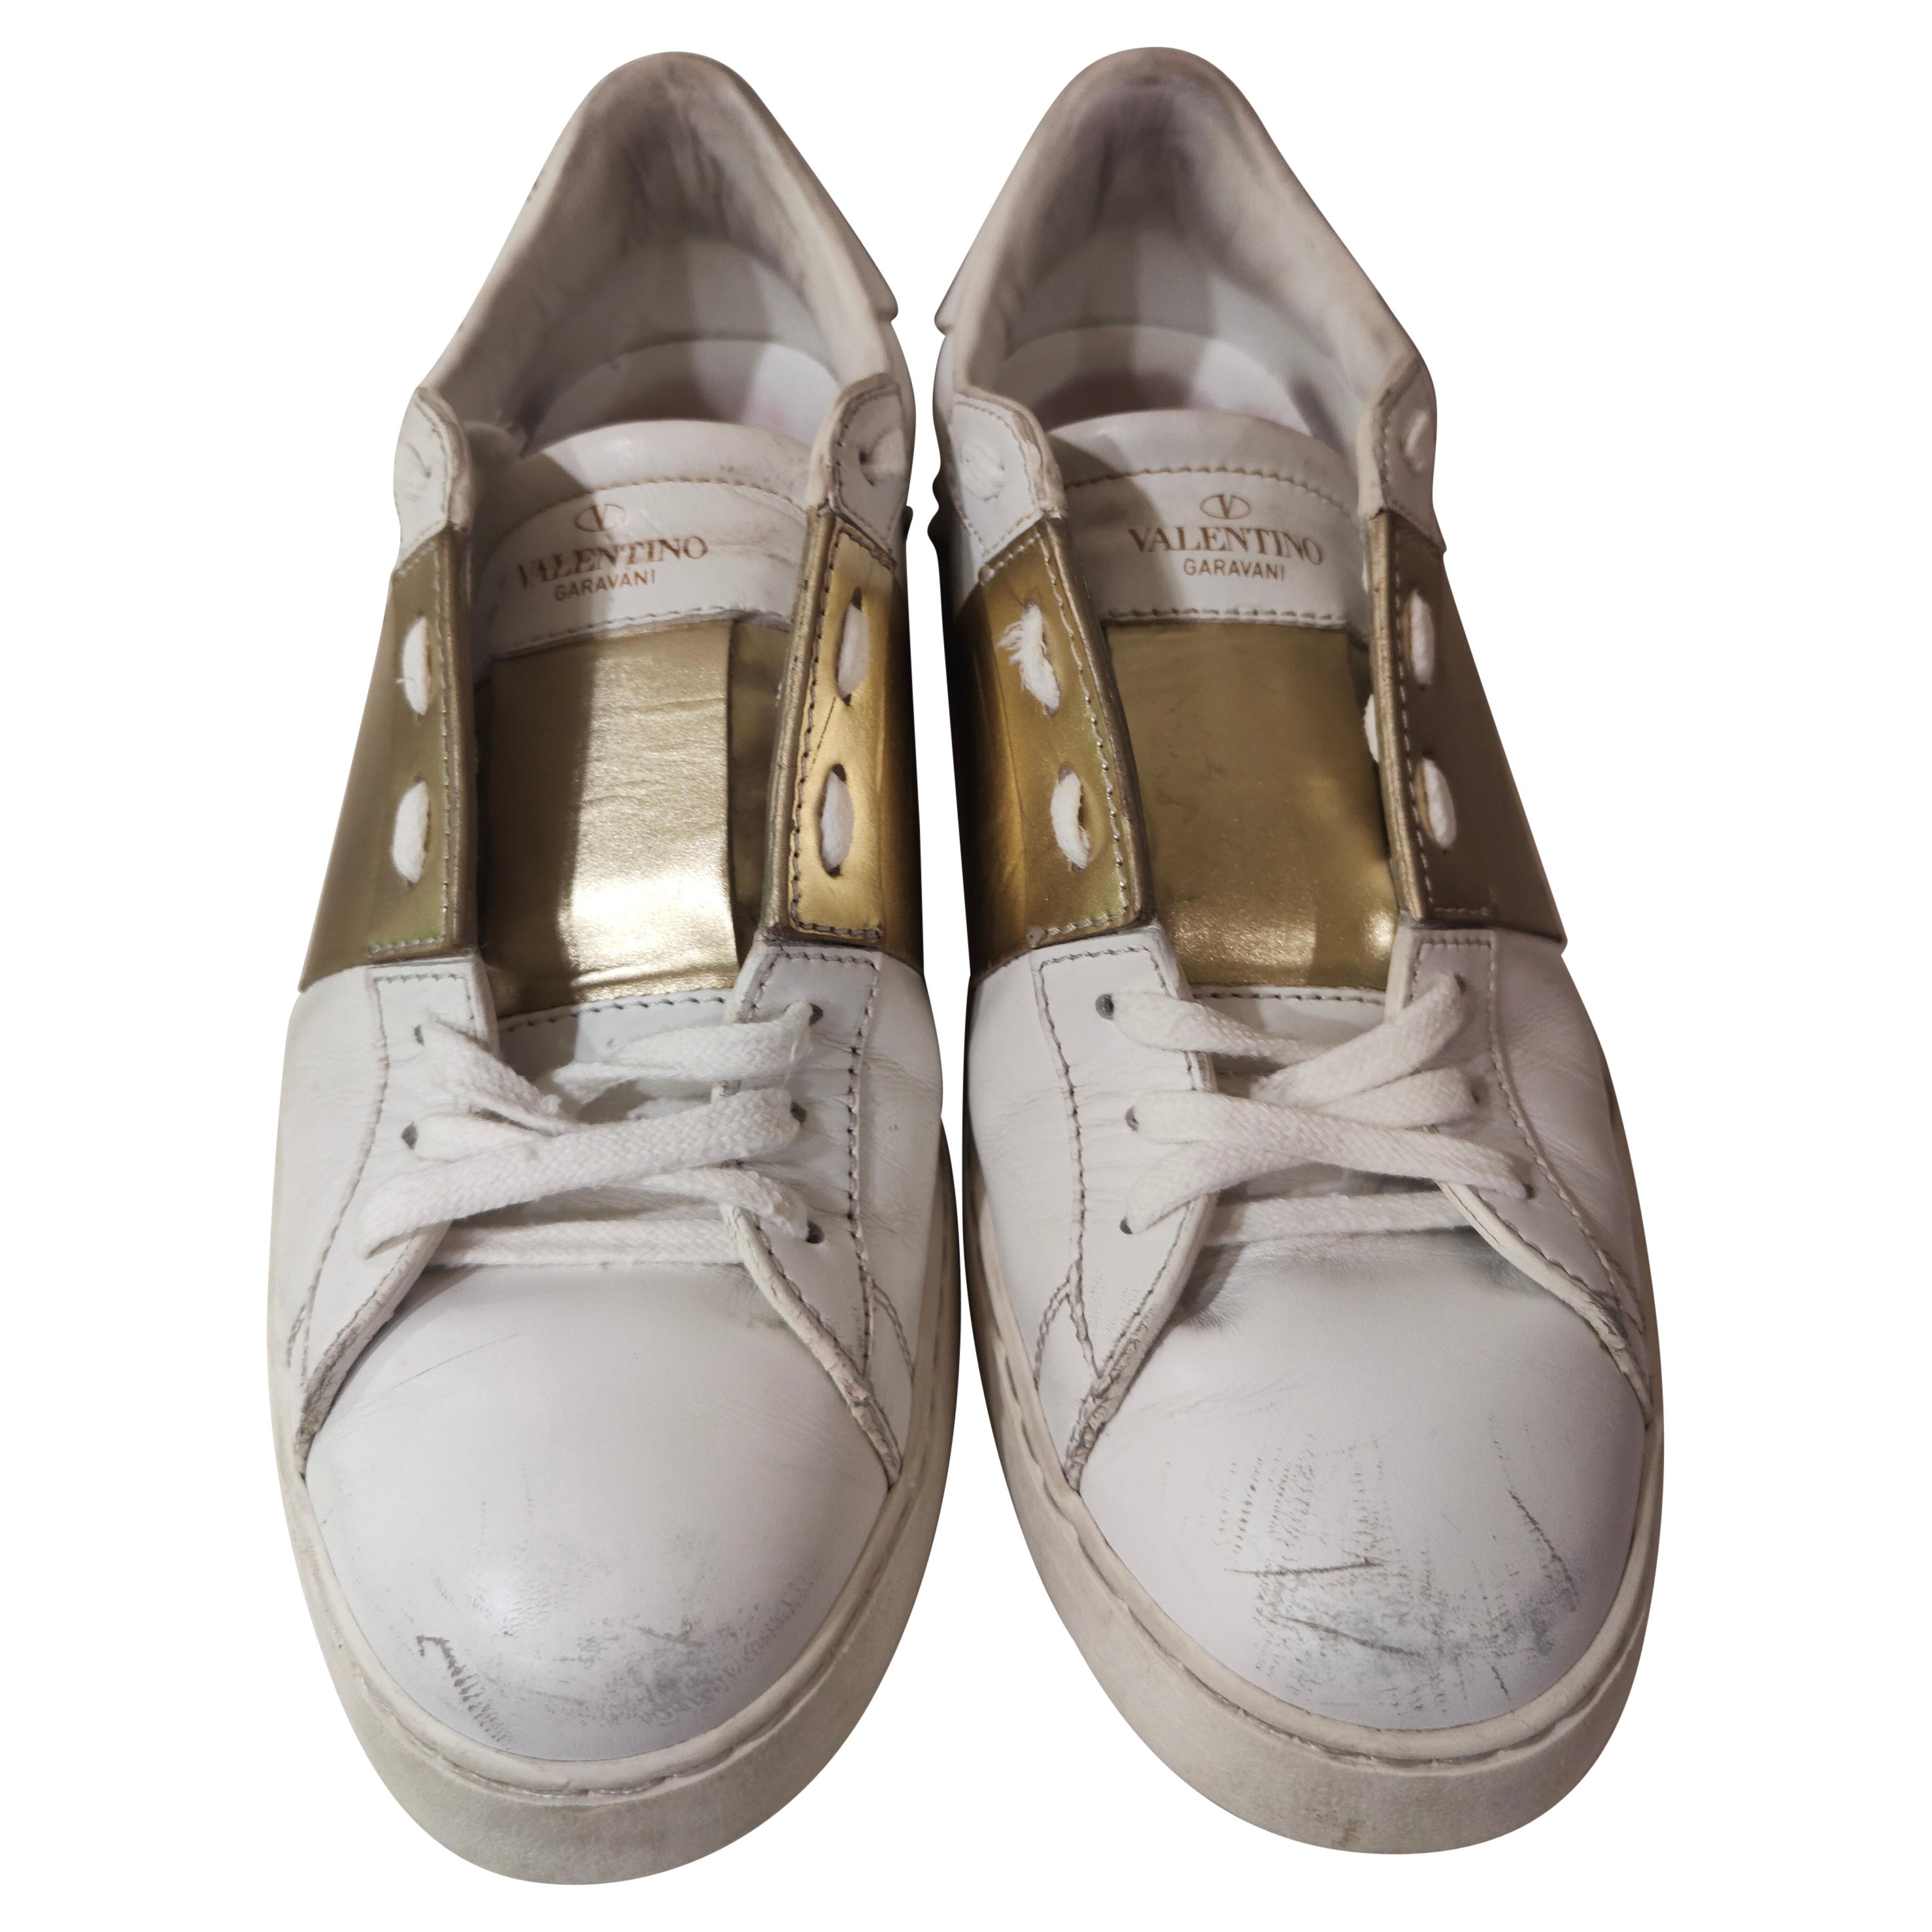 Valentino Garavani white and gold leather studs sneakers For Sale